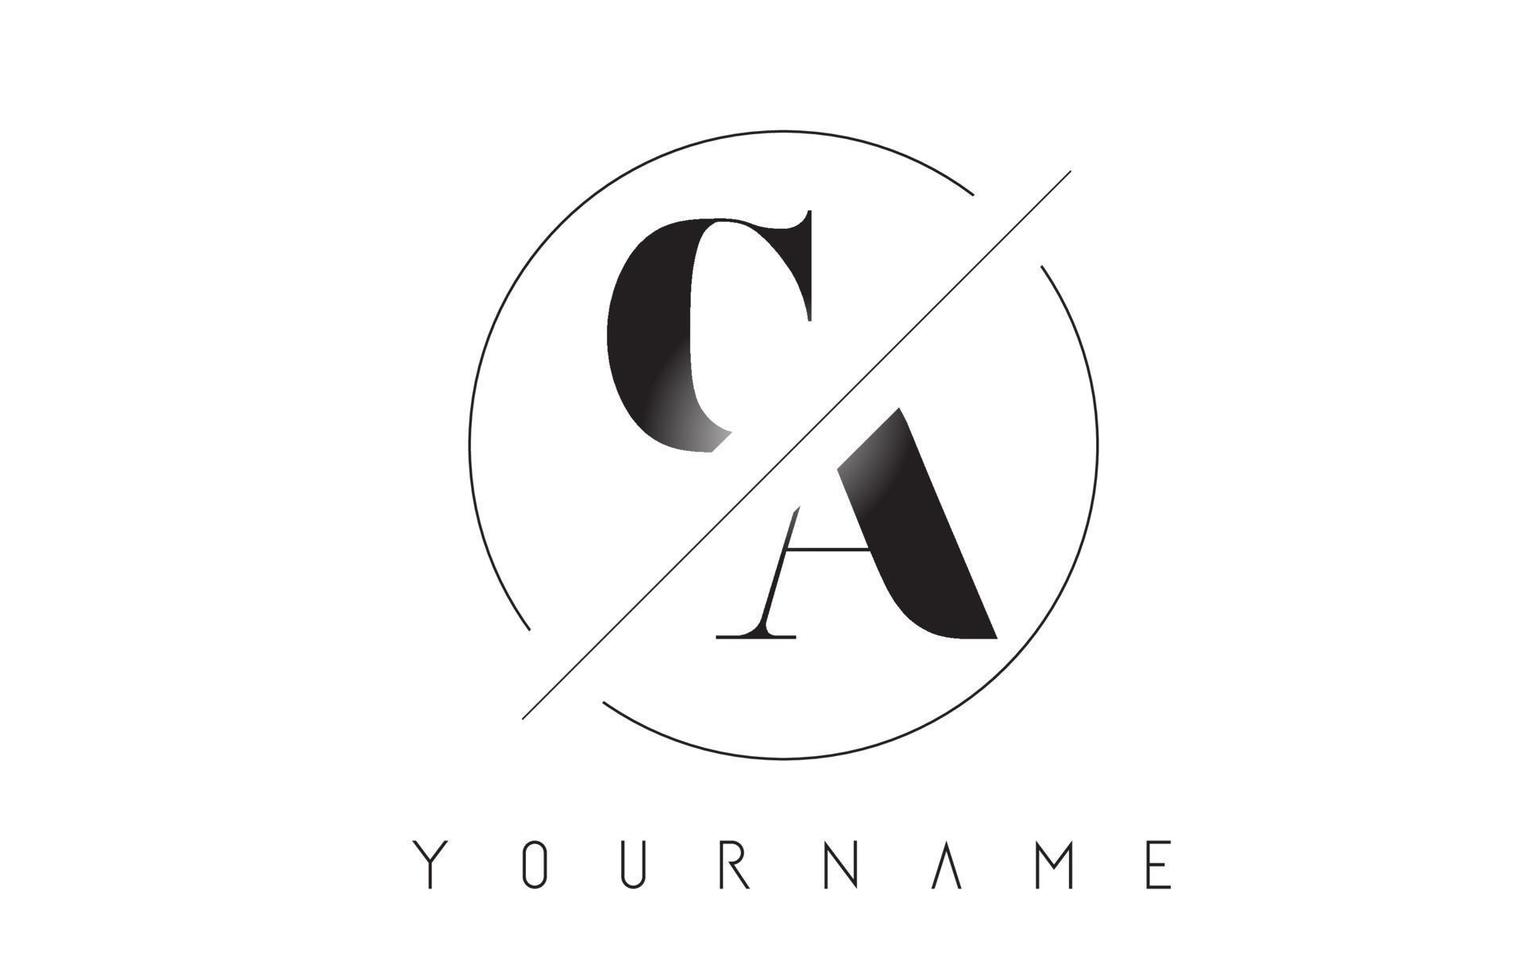 CA Letter Logo with Cutted and Intersected Design vector